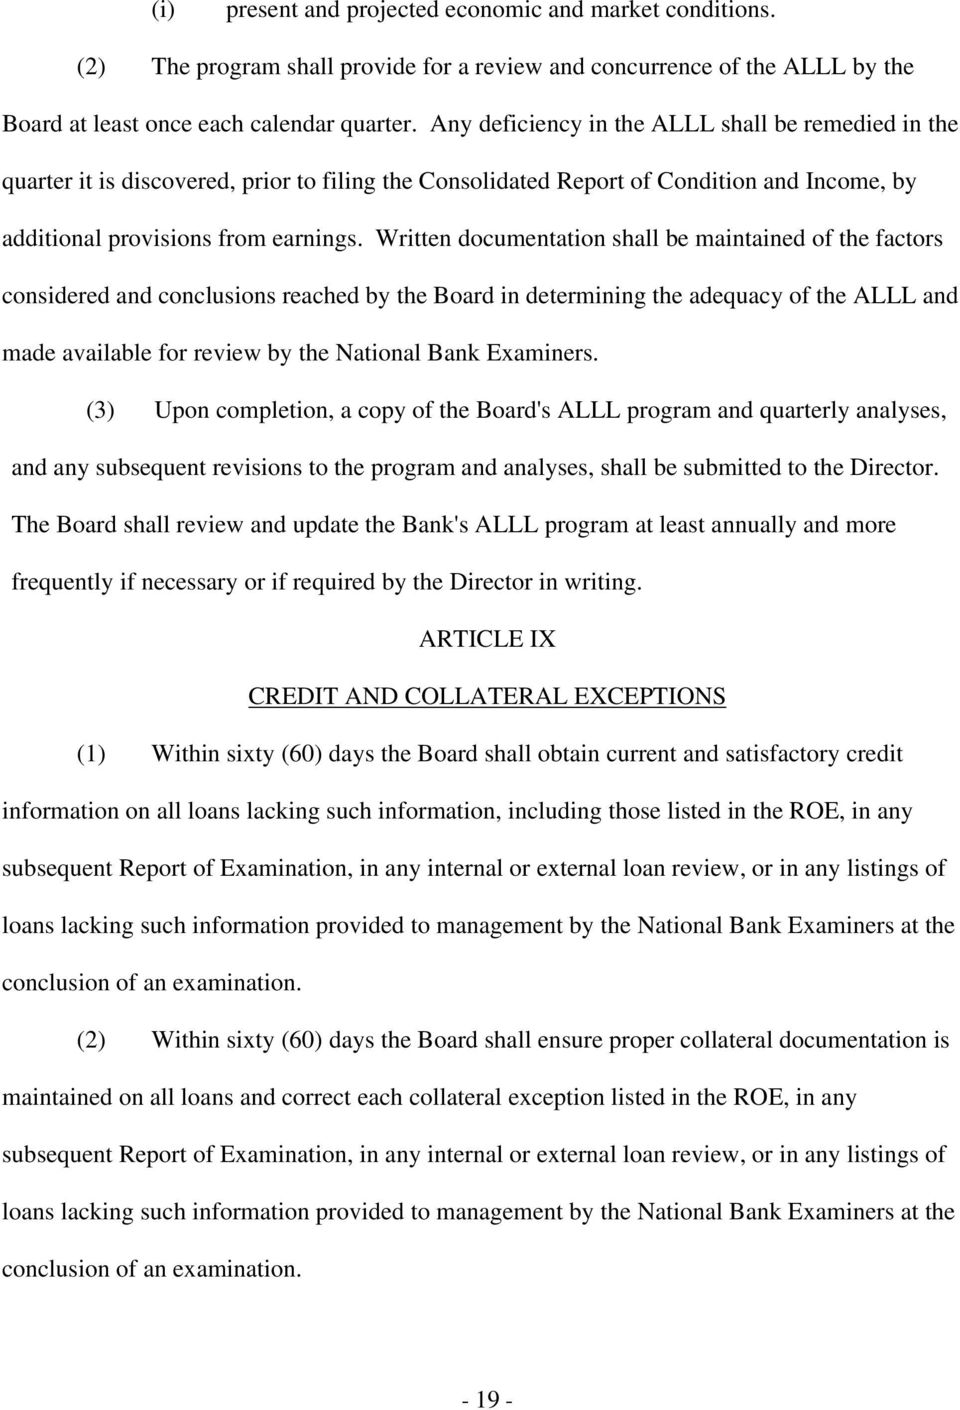 Written documentation shall be maintained of the factors considered and conclusions reached by the Board in determining the adequacy of the ALLL and made available for review by the National Bank